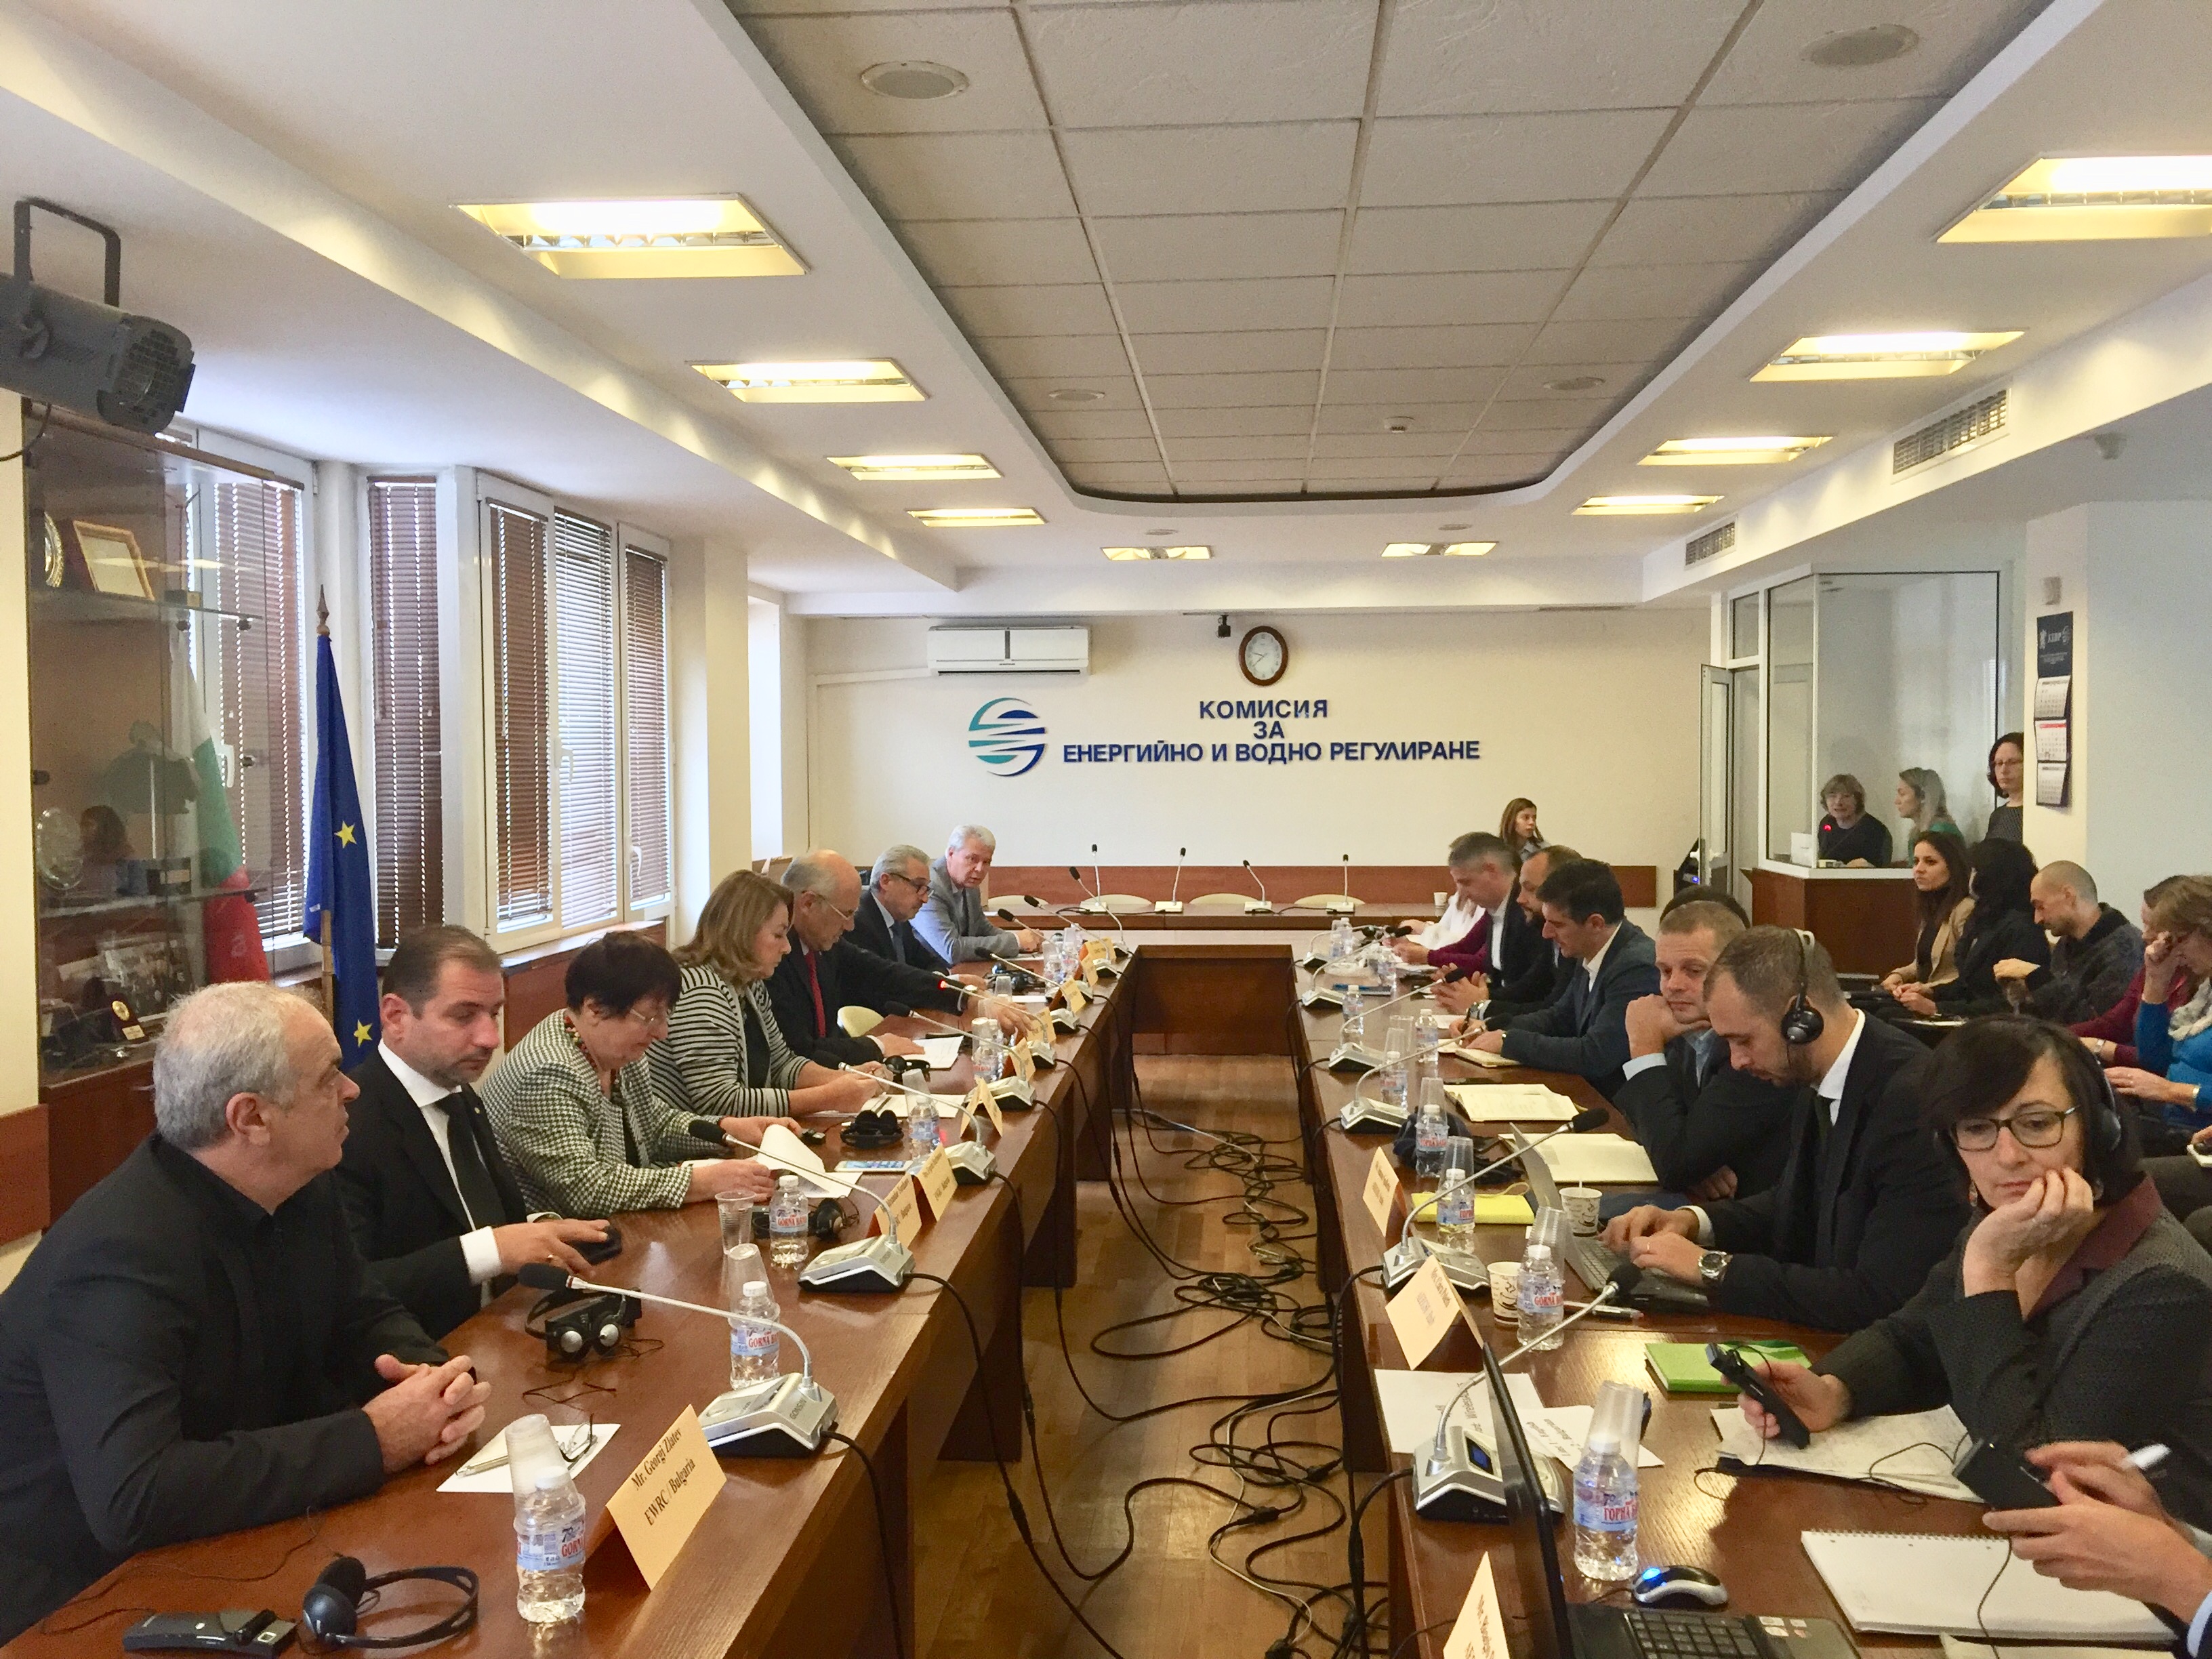 EWRC AND THE ENERGY REGULATOR OF ITALY HELD A WORKSHOP ON GOOD REGULATORY PRACTICES IN THE LIBERALISATION OF THE ELECTRICITY MARKET AND MEASURES AGAINST LATE PAYMENT OF ELECTRICITY BILLS